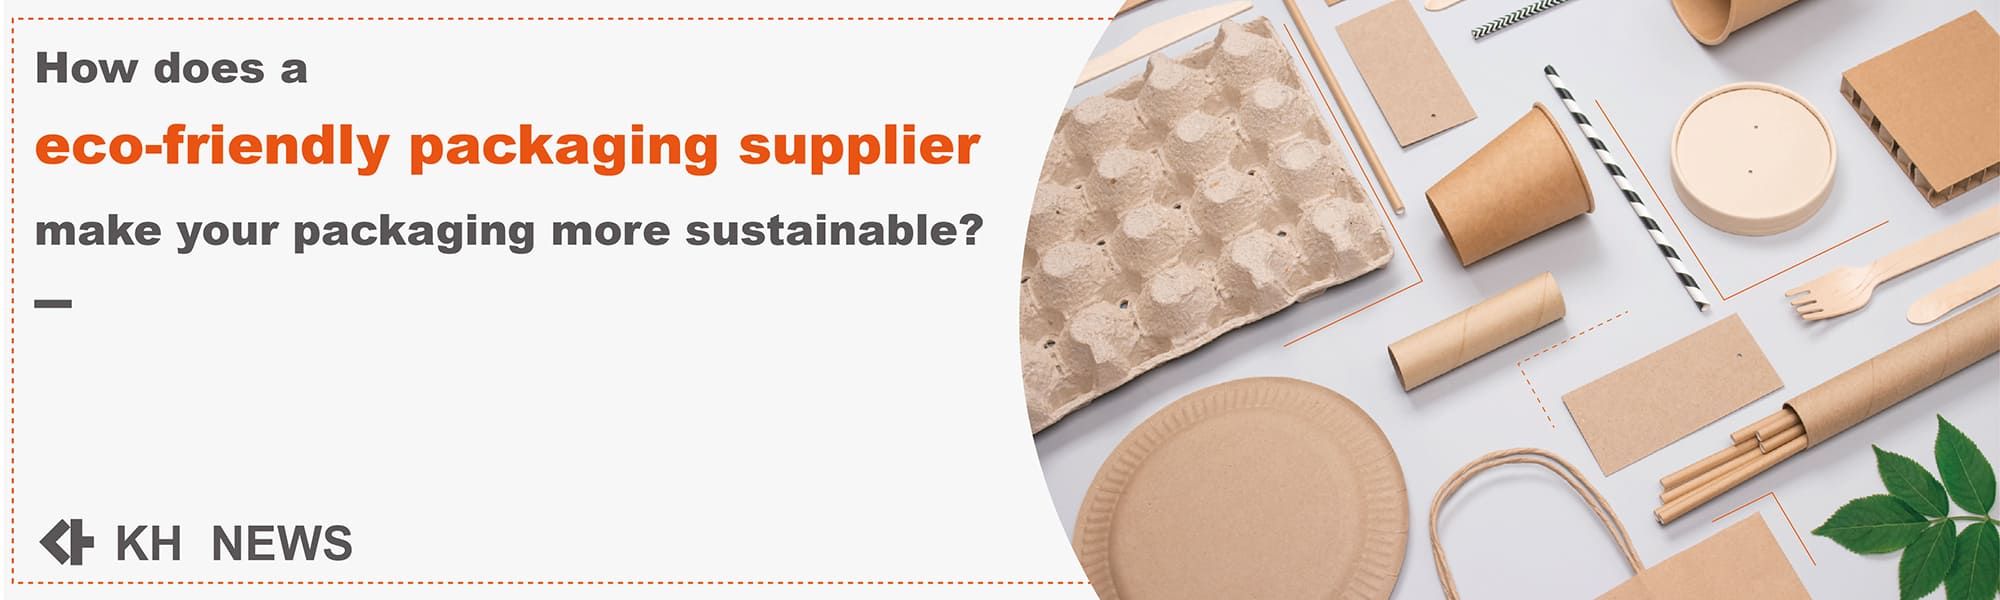 eco-friendly packaging supplier